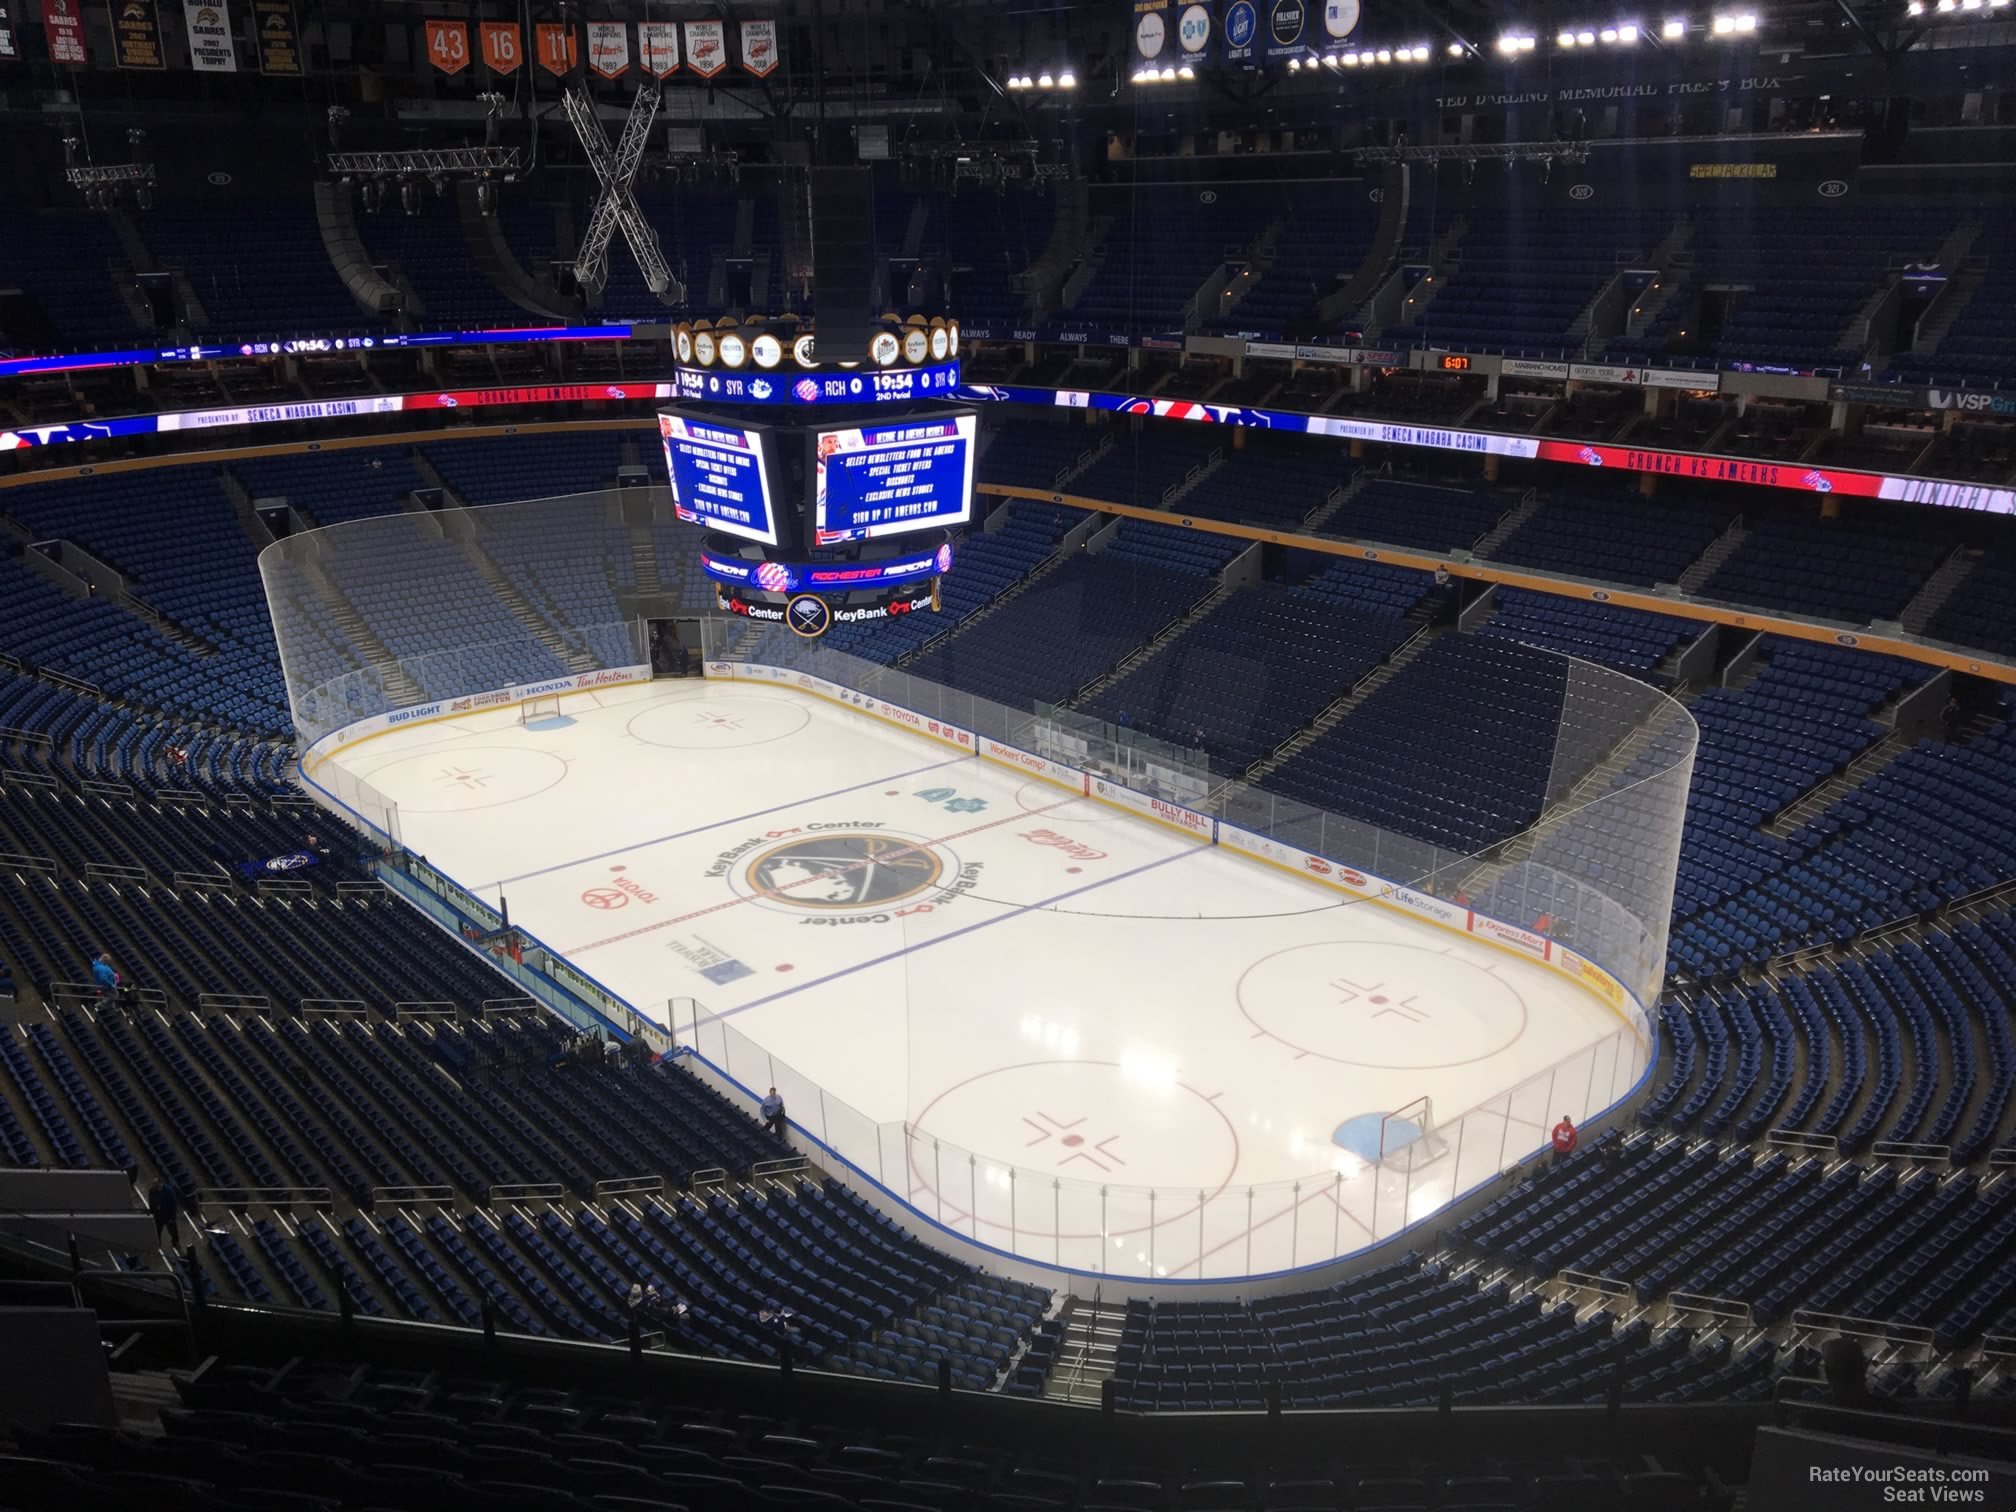 section 301, row 13 seat view  for hockey - keybank center